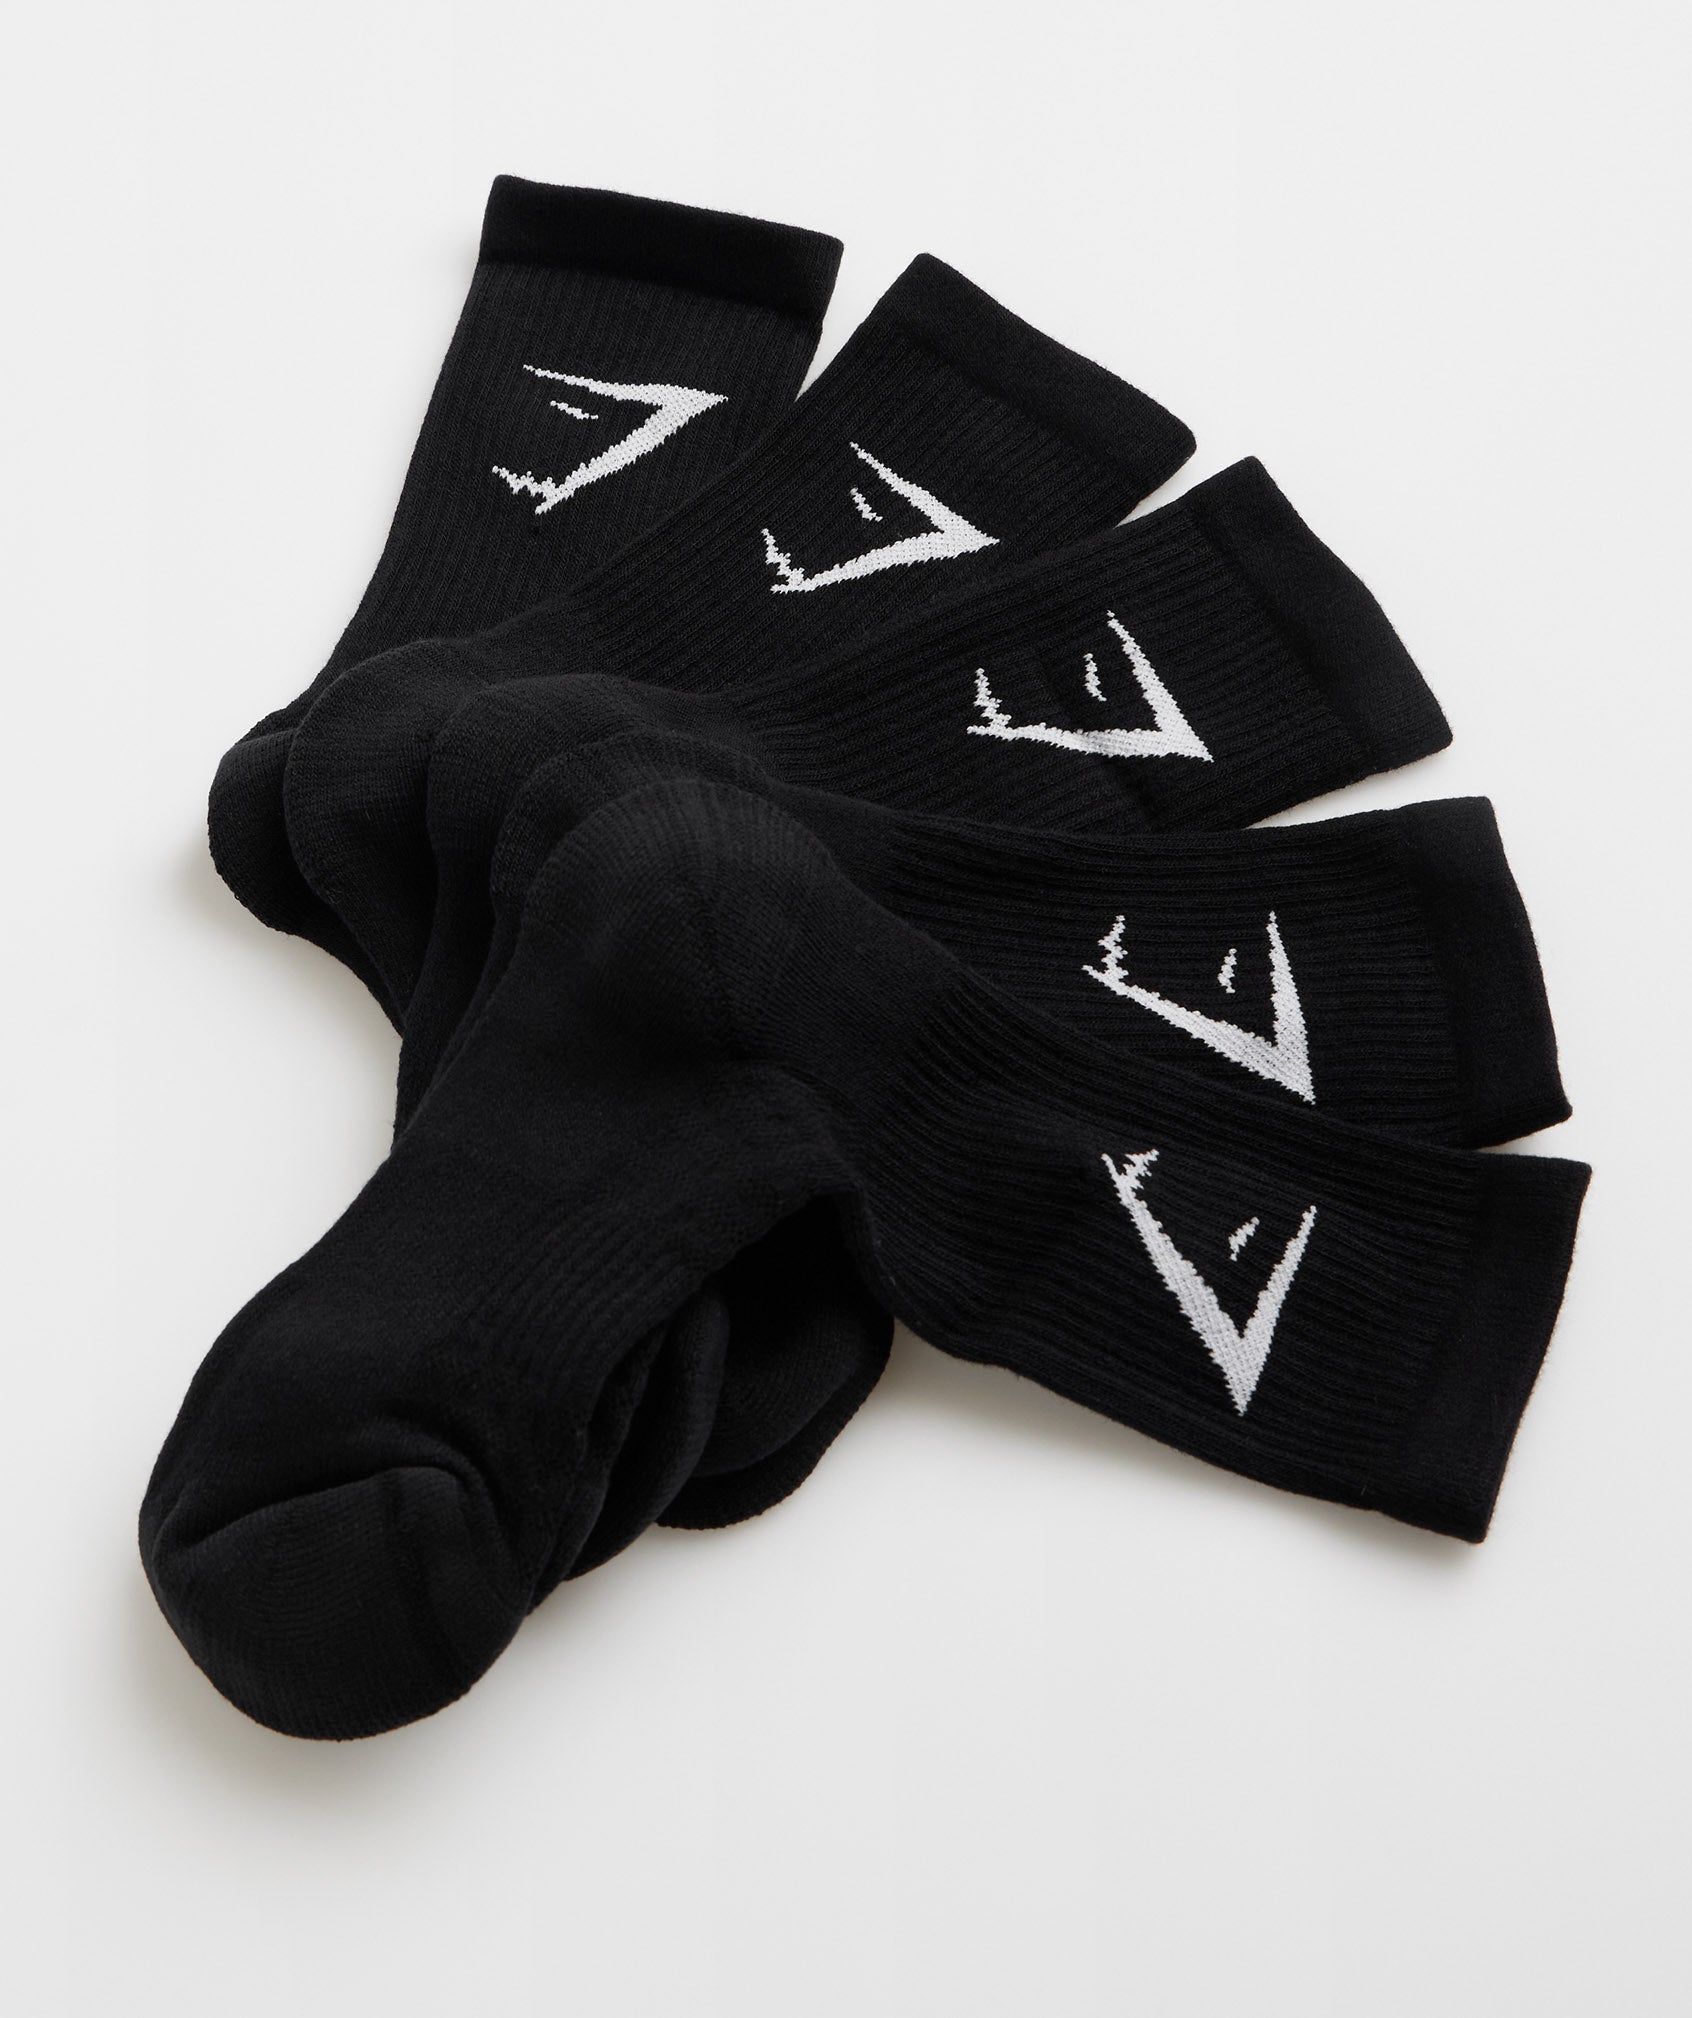 https://cdn.shopify.com/s/files/1/2446/8477/products/CrewSocks5pk-BlackI2A3S-BBBB_d1699d05-b8a0-4f02-bb1b-16f15f5d17f9.jpg?v=1678803010